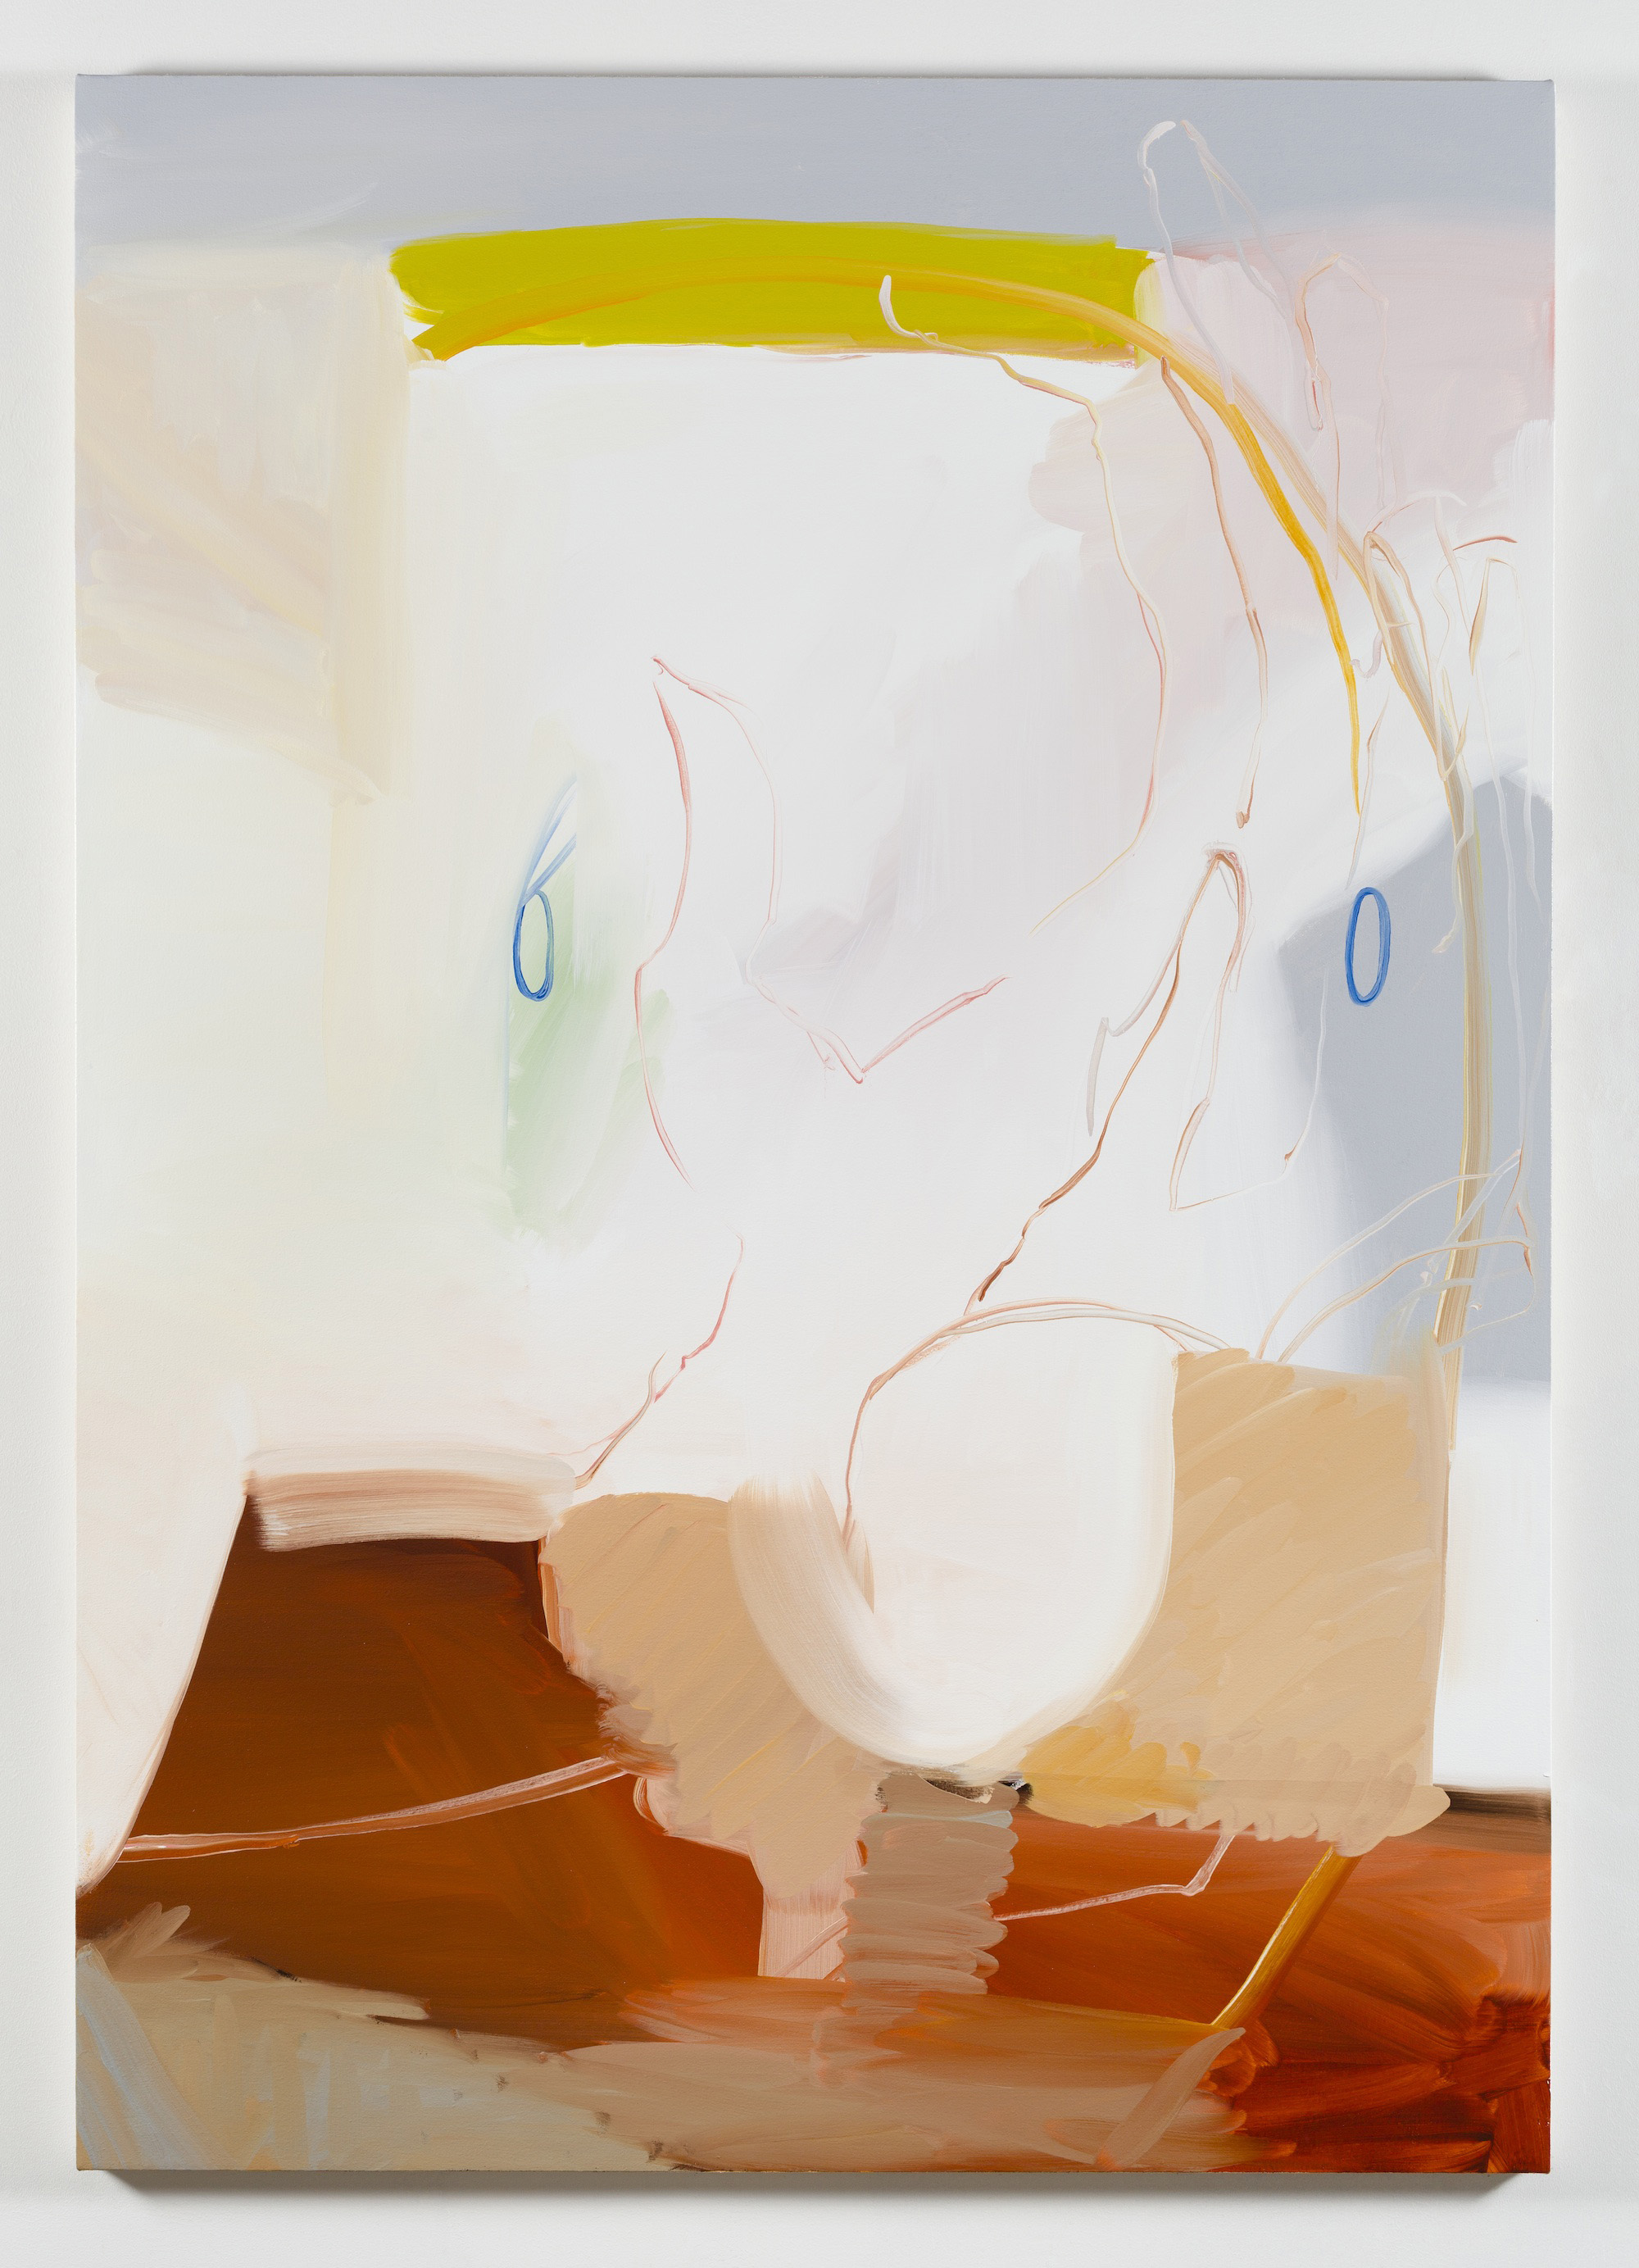 8 - Heather Guertin at Brennan and Griffin New York